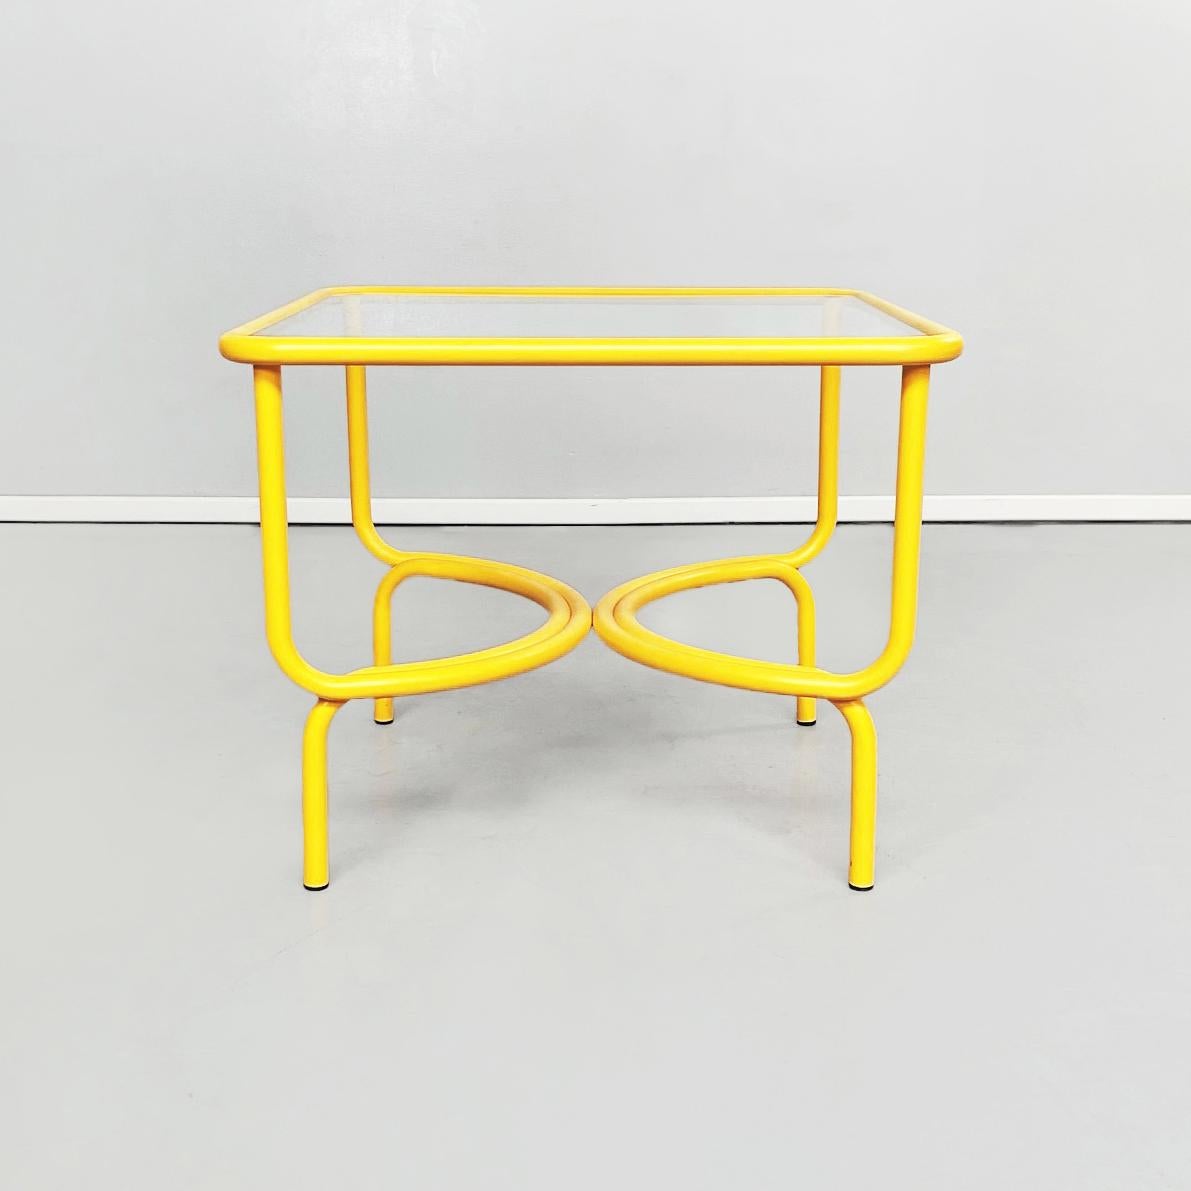 Italian mid-century yellow table Locus Solus by Gae Aulenti for Poltronova, 1960s
Square table from the Locus Solus series, in yellow painted metal. The top is composed by a square tubular profile with rounded corners and a glass top that rests